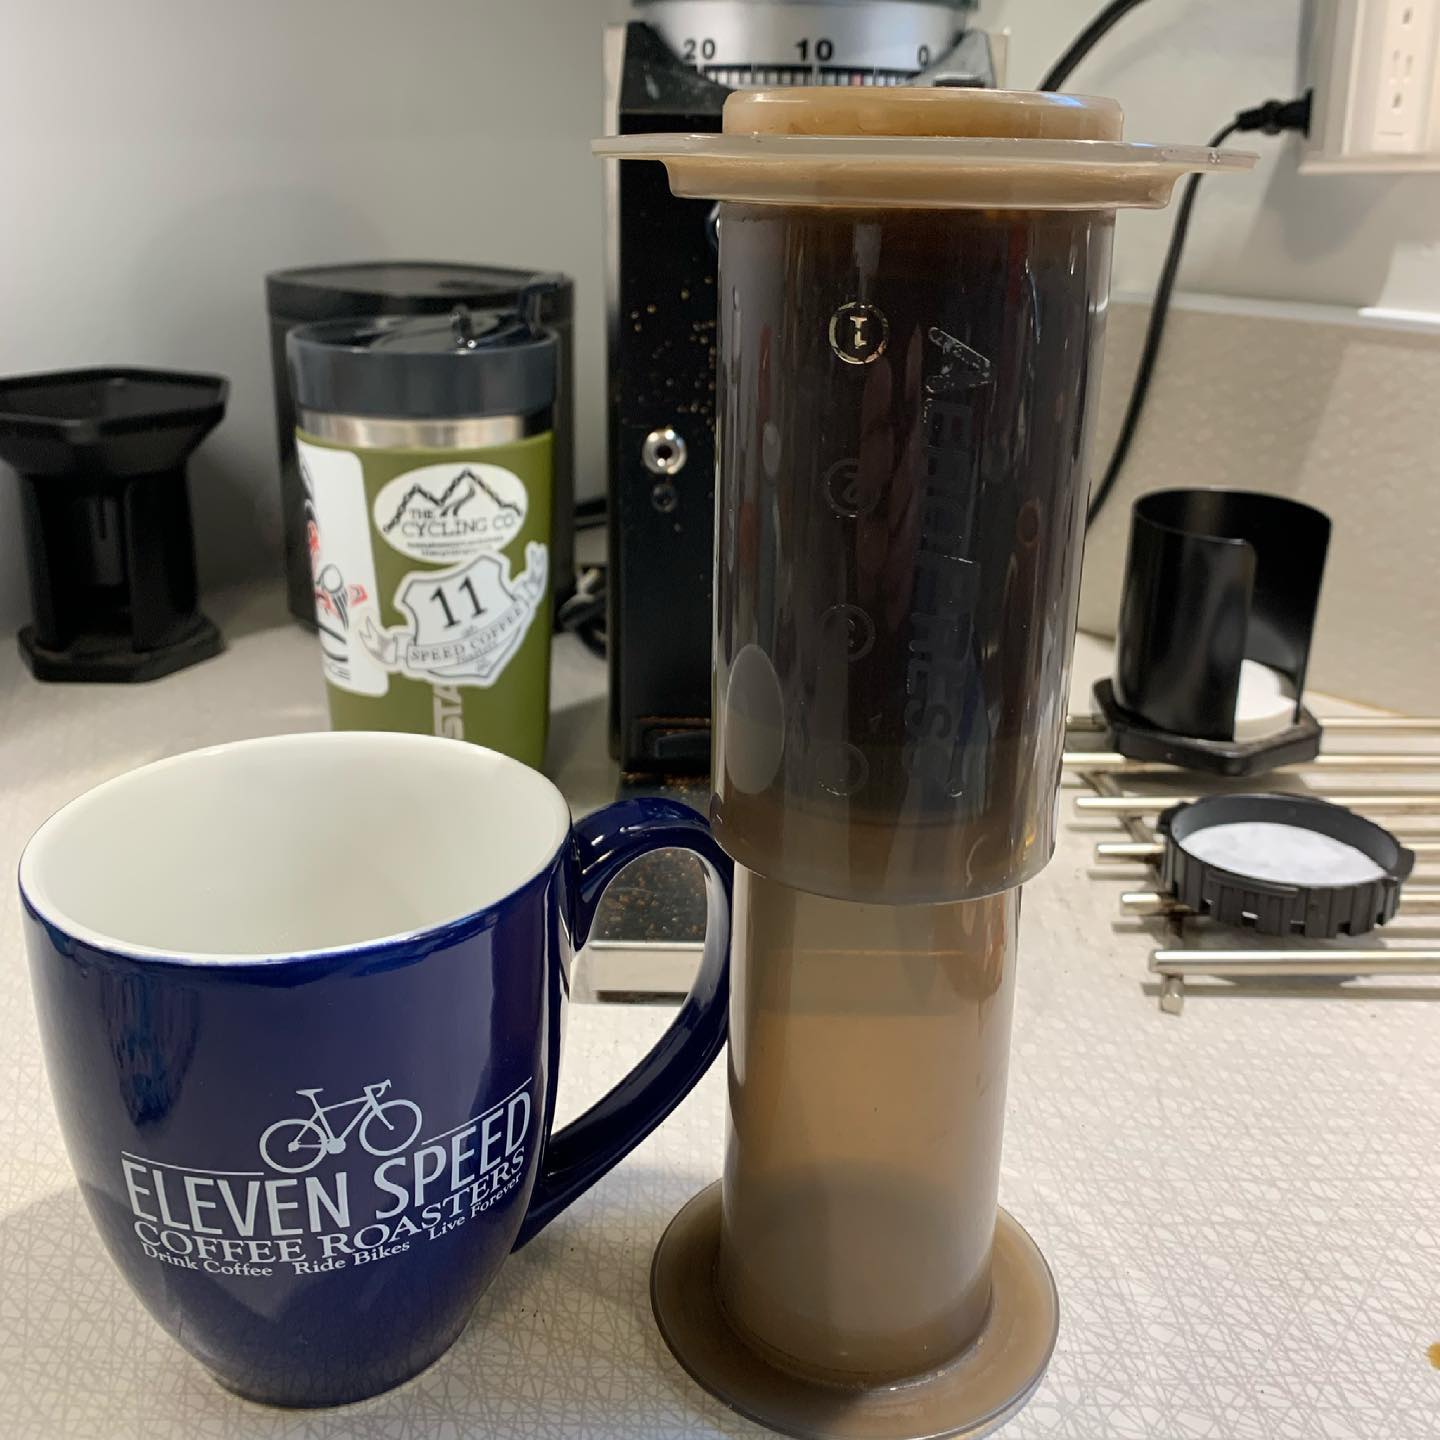 Does matching the mug to the beans magically make coffee taste better? I’ll find out shortly. #coffee #yyjcoffee #elevenspeedcoffee